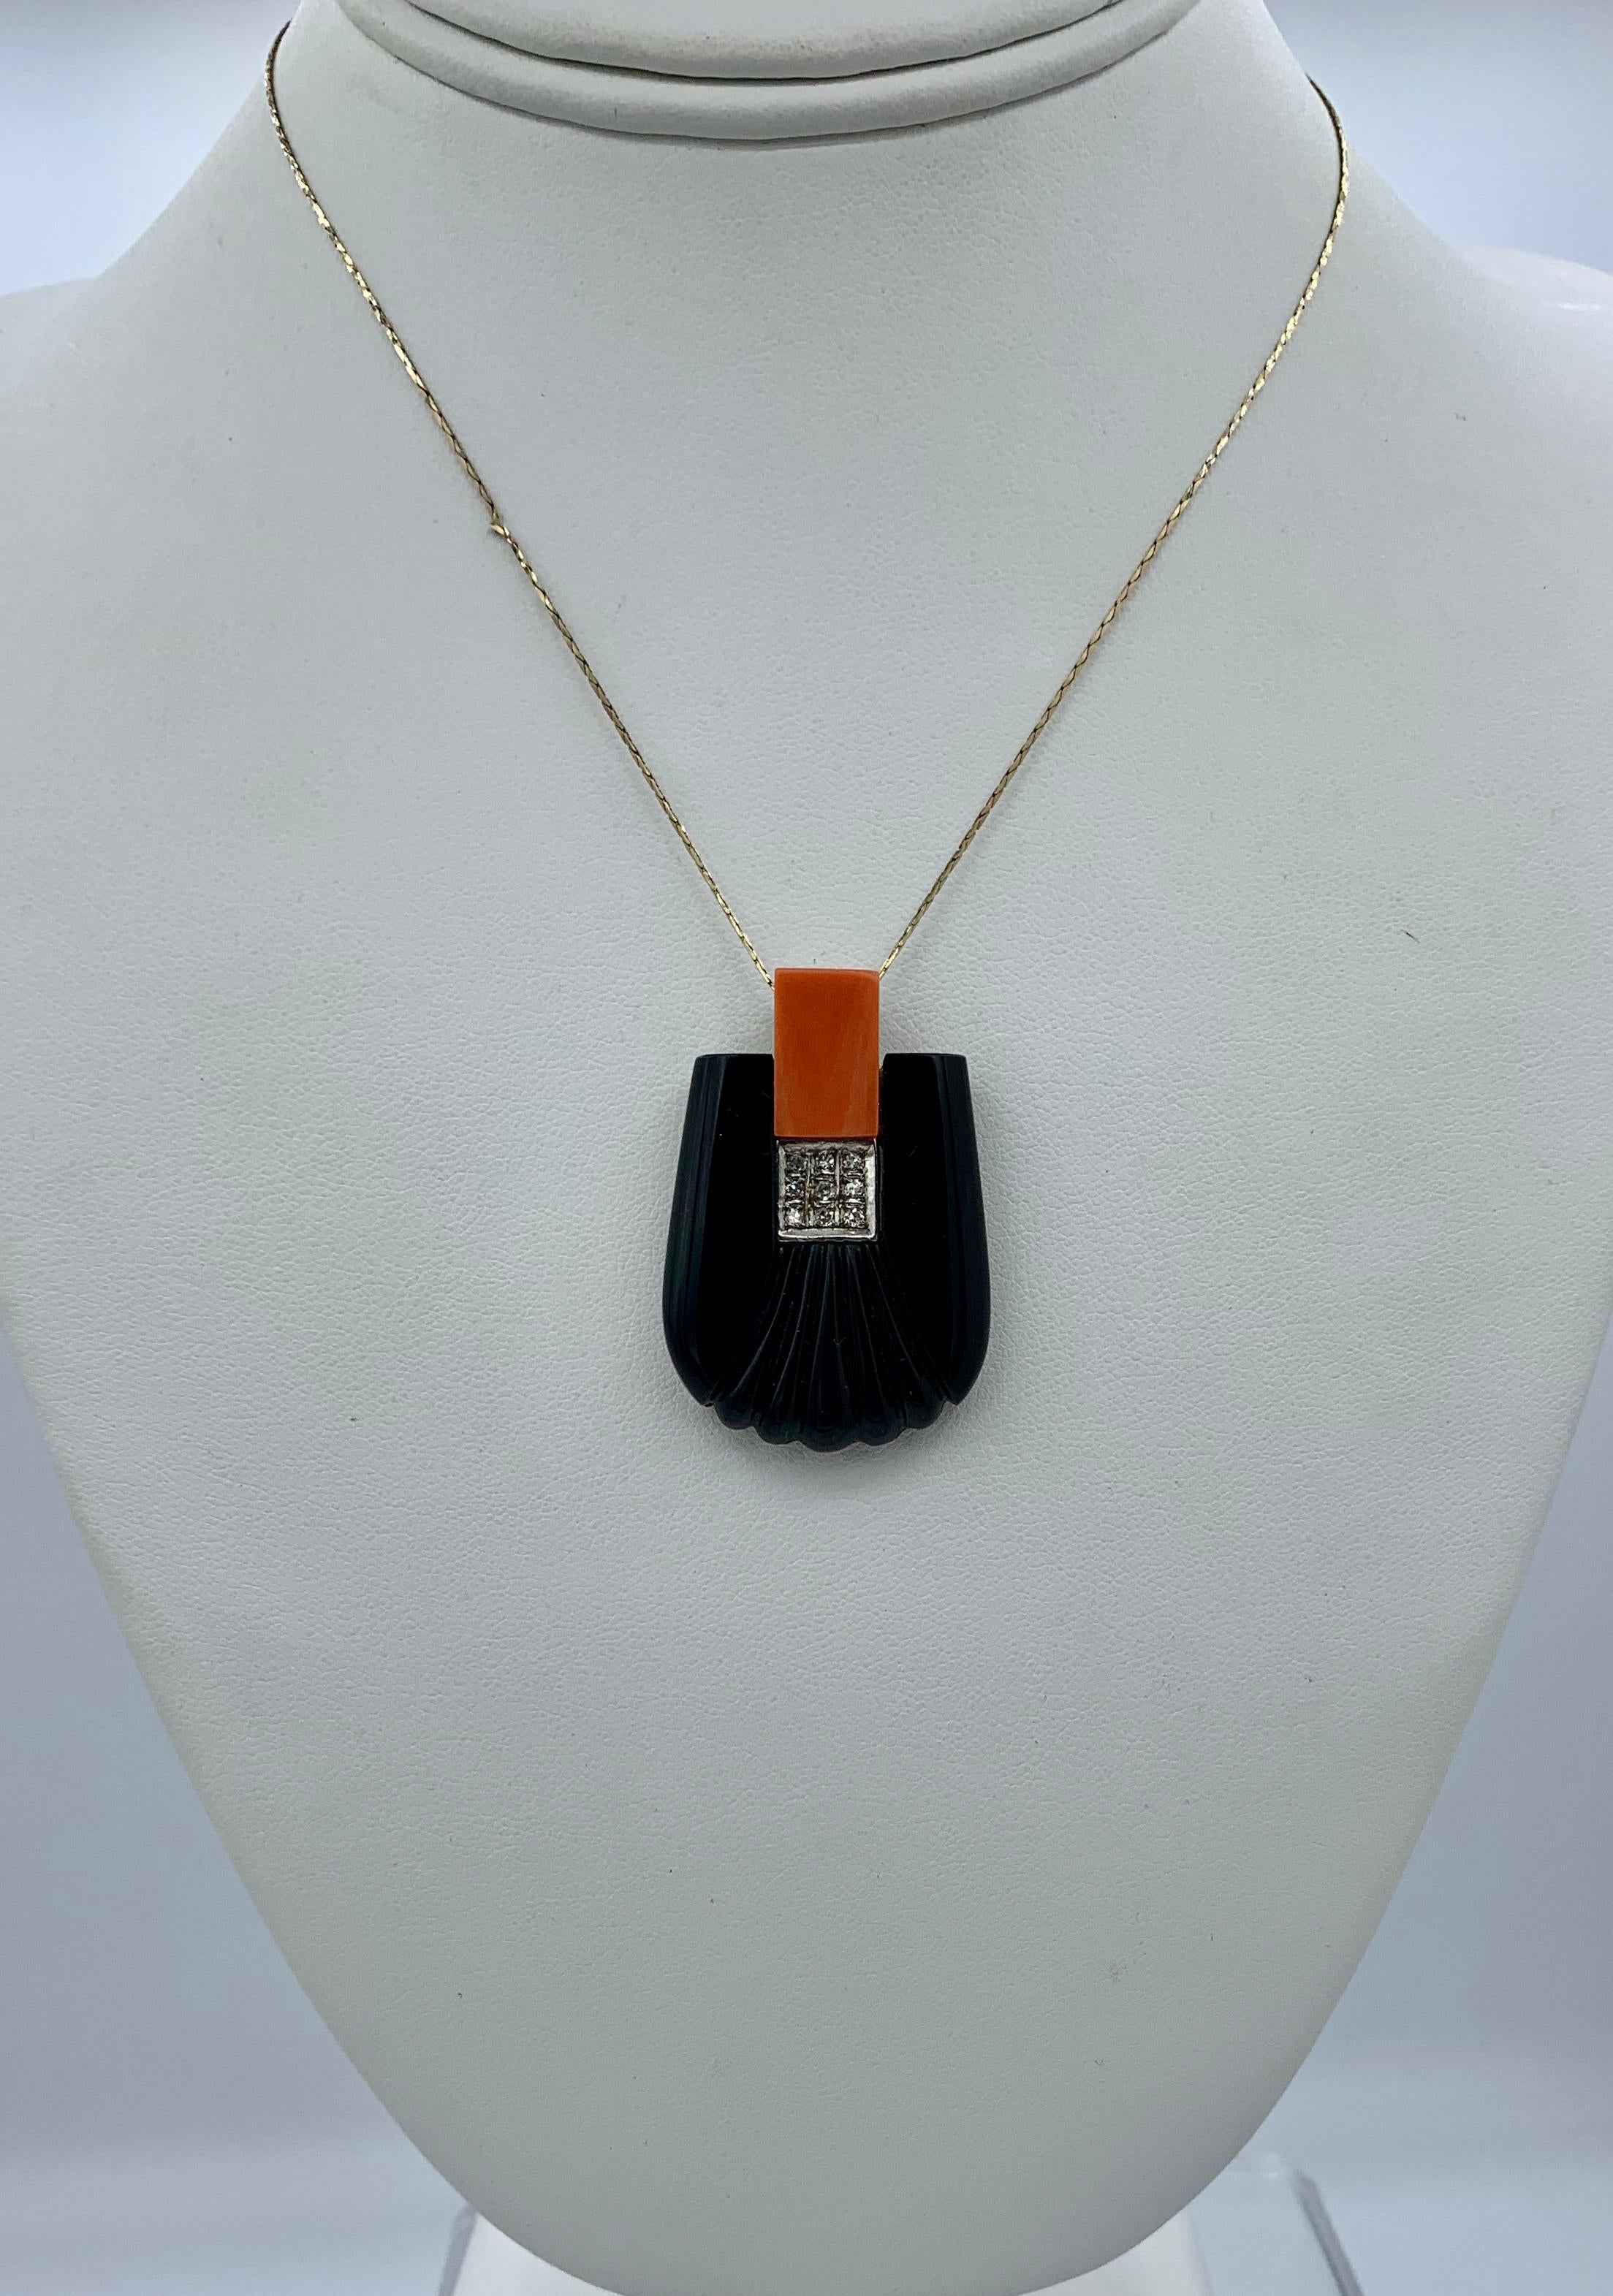 This is a stunning Antique Art Deco - Retro Pendant in Black Onyx with a stunning nine Diamond checkerboard pattern in the center with a vivid Coral gem at the top and set in 14 Karat Gold.  The Onyx, Coral and Diamond Pendant has fabulous Art Deco